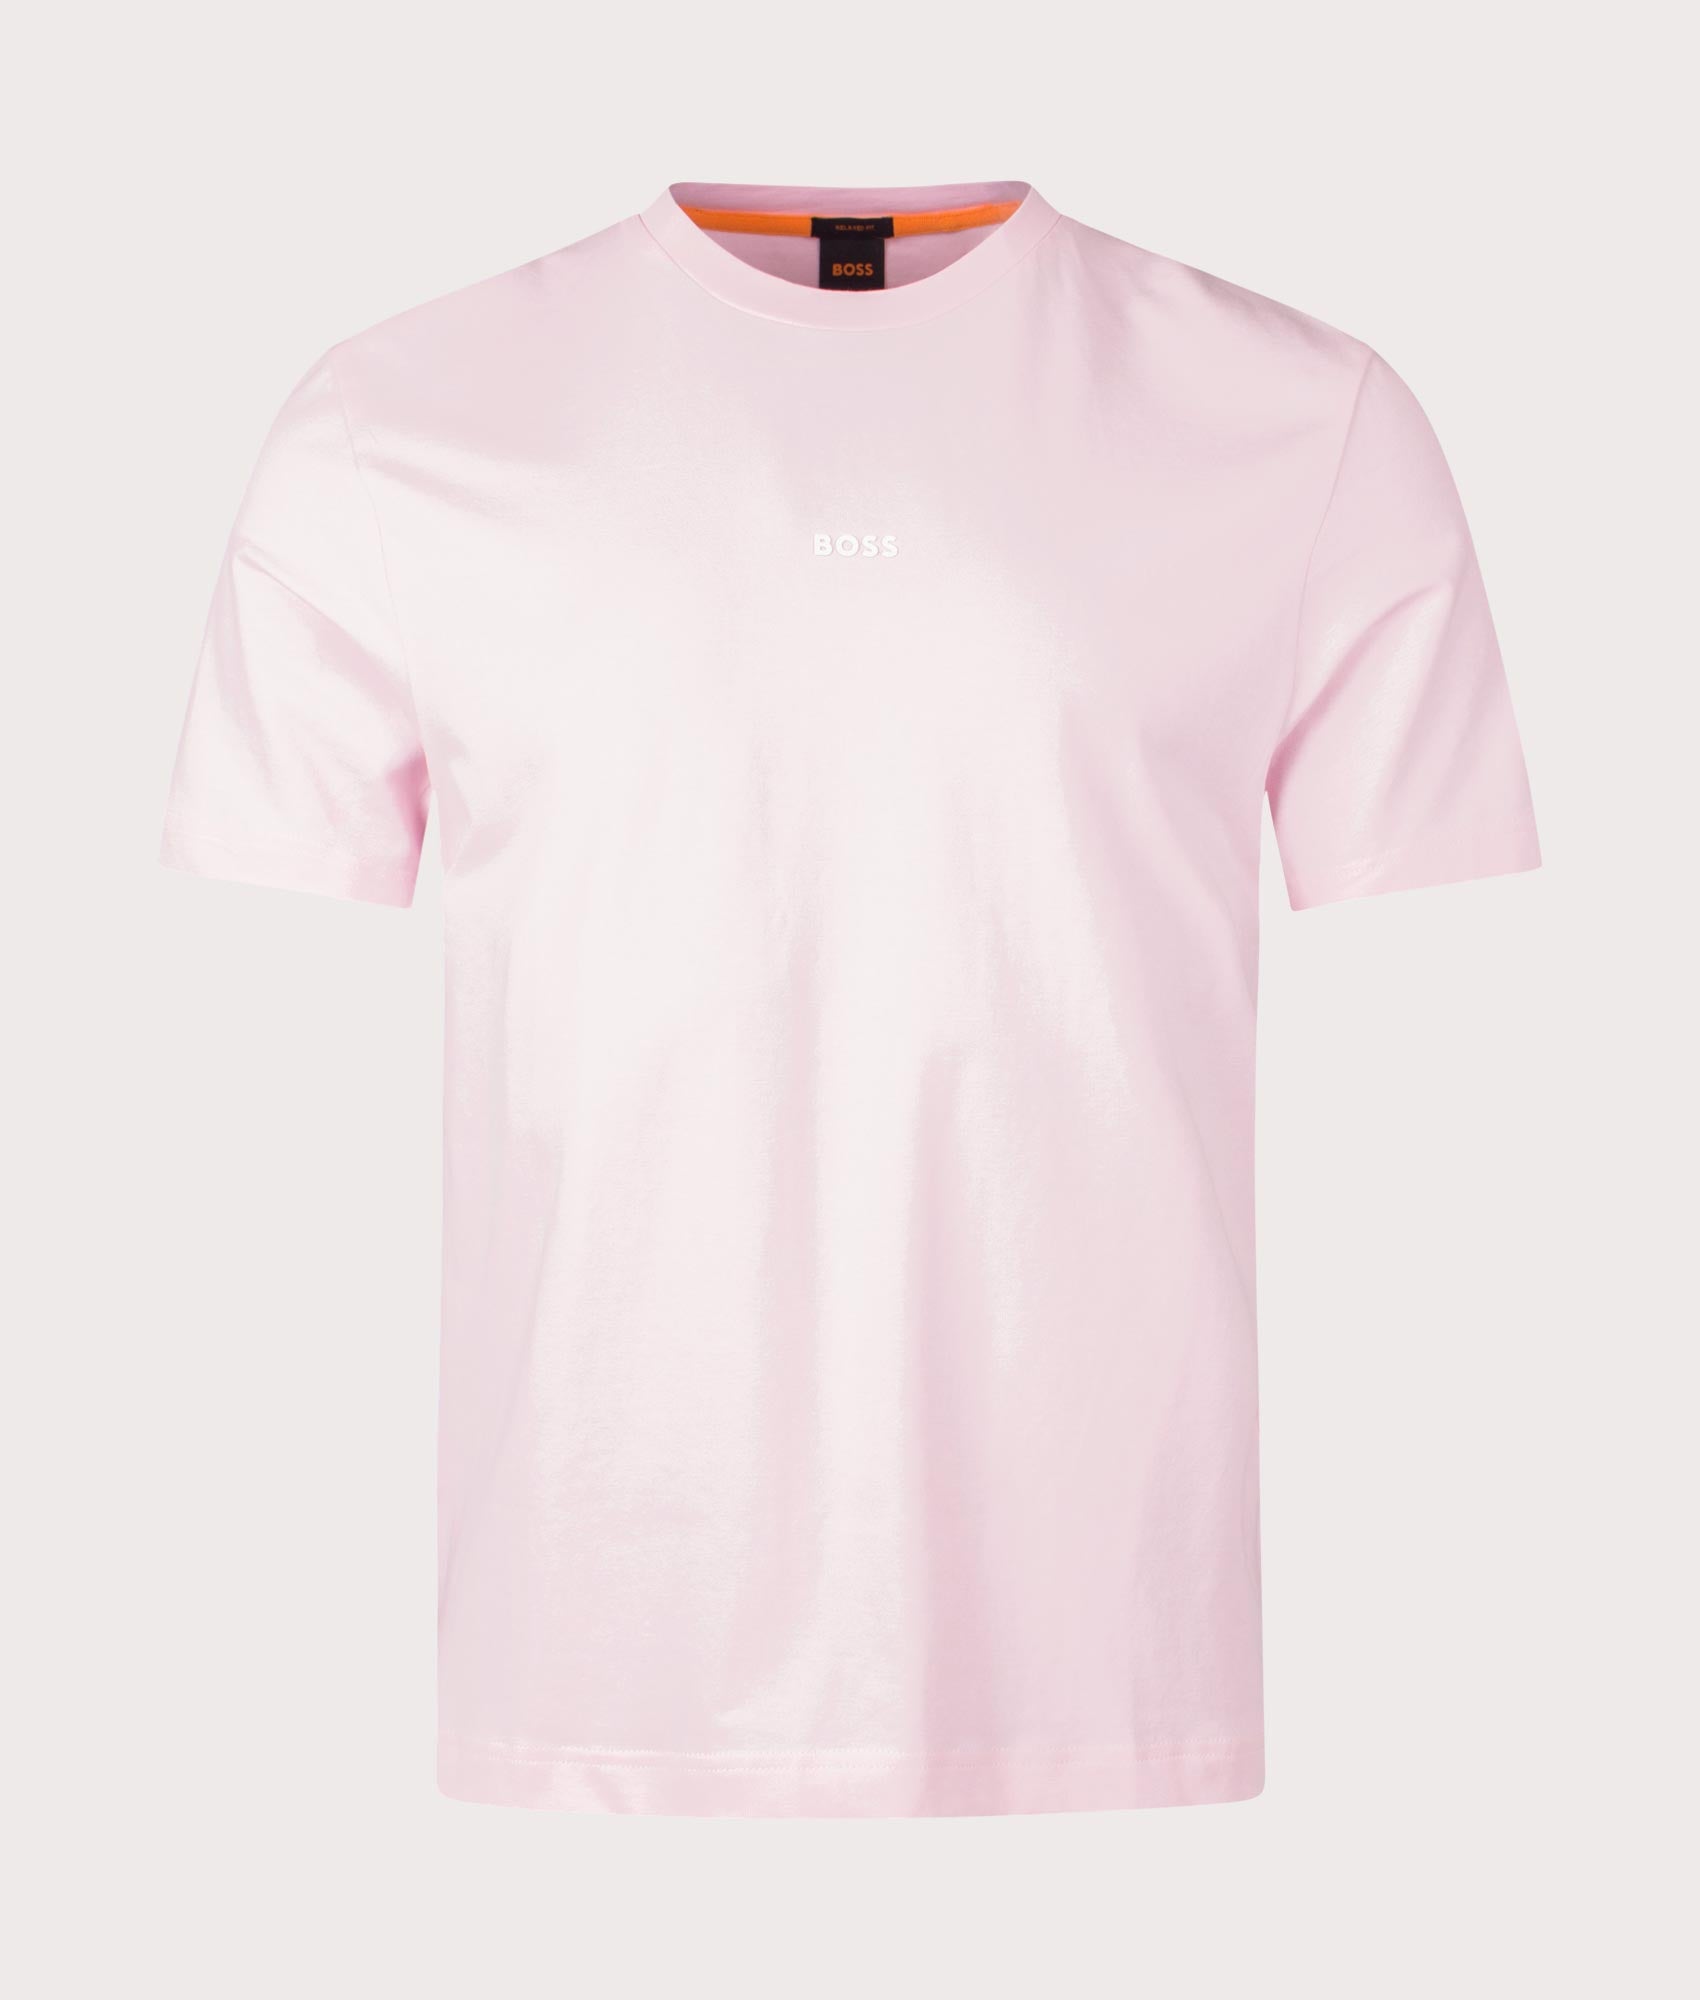 Relaxed Fit Tchup T-Shirt Light Pastel Pink | BOSS | EQVVS